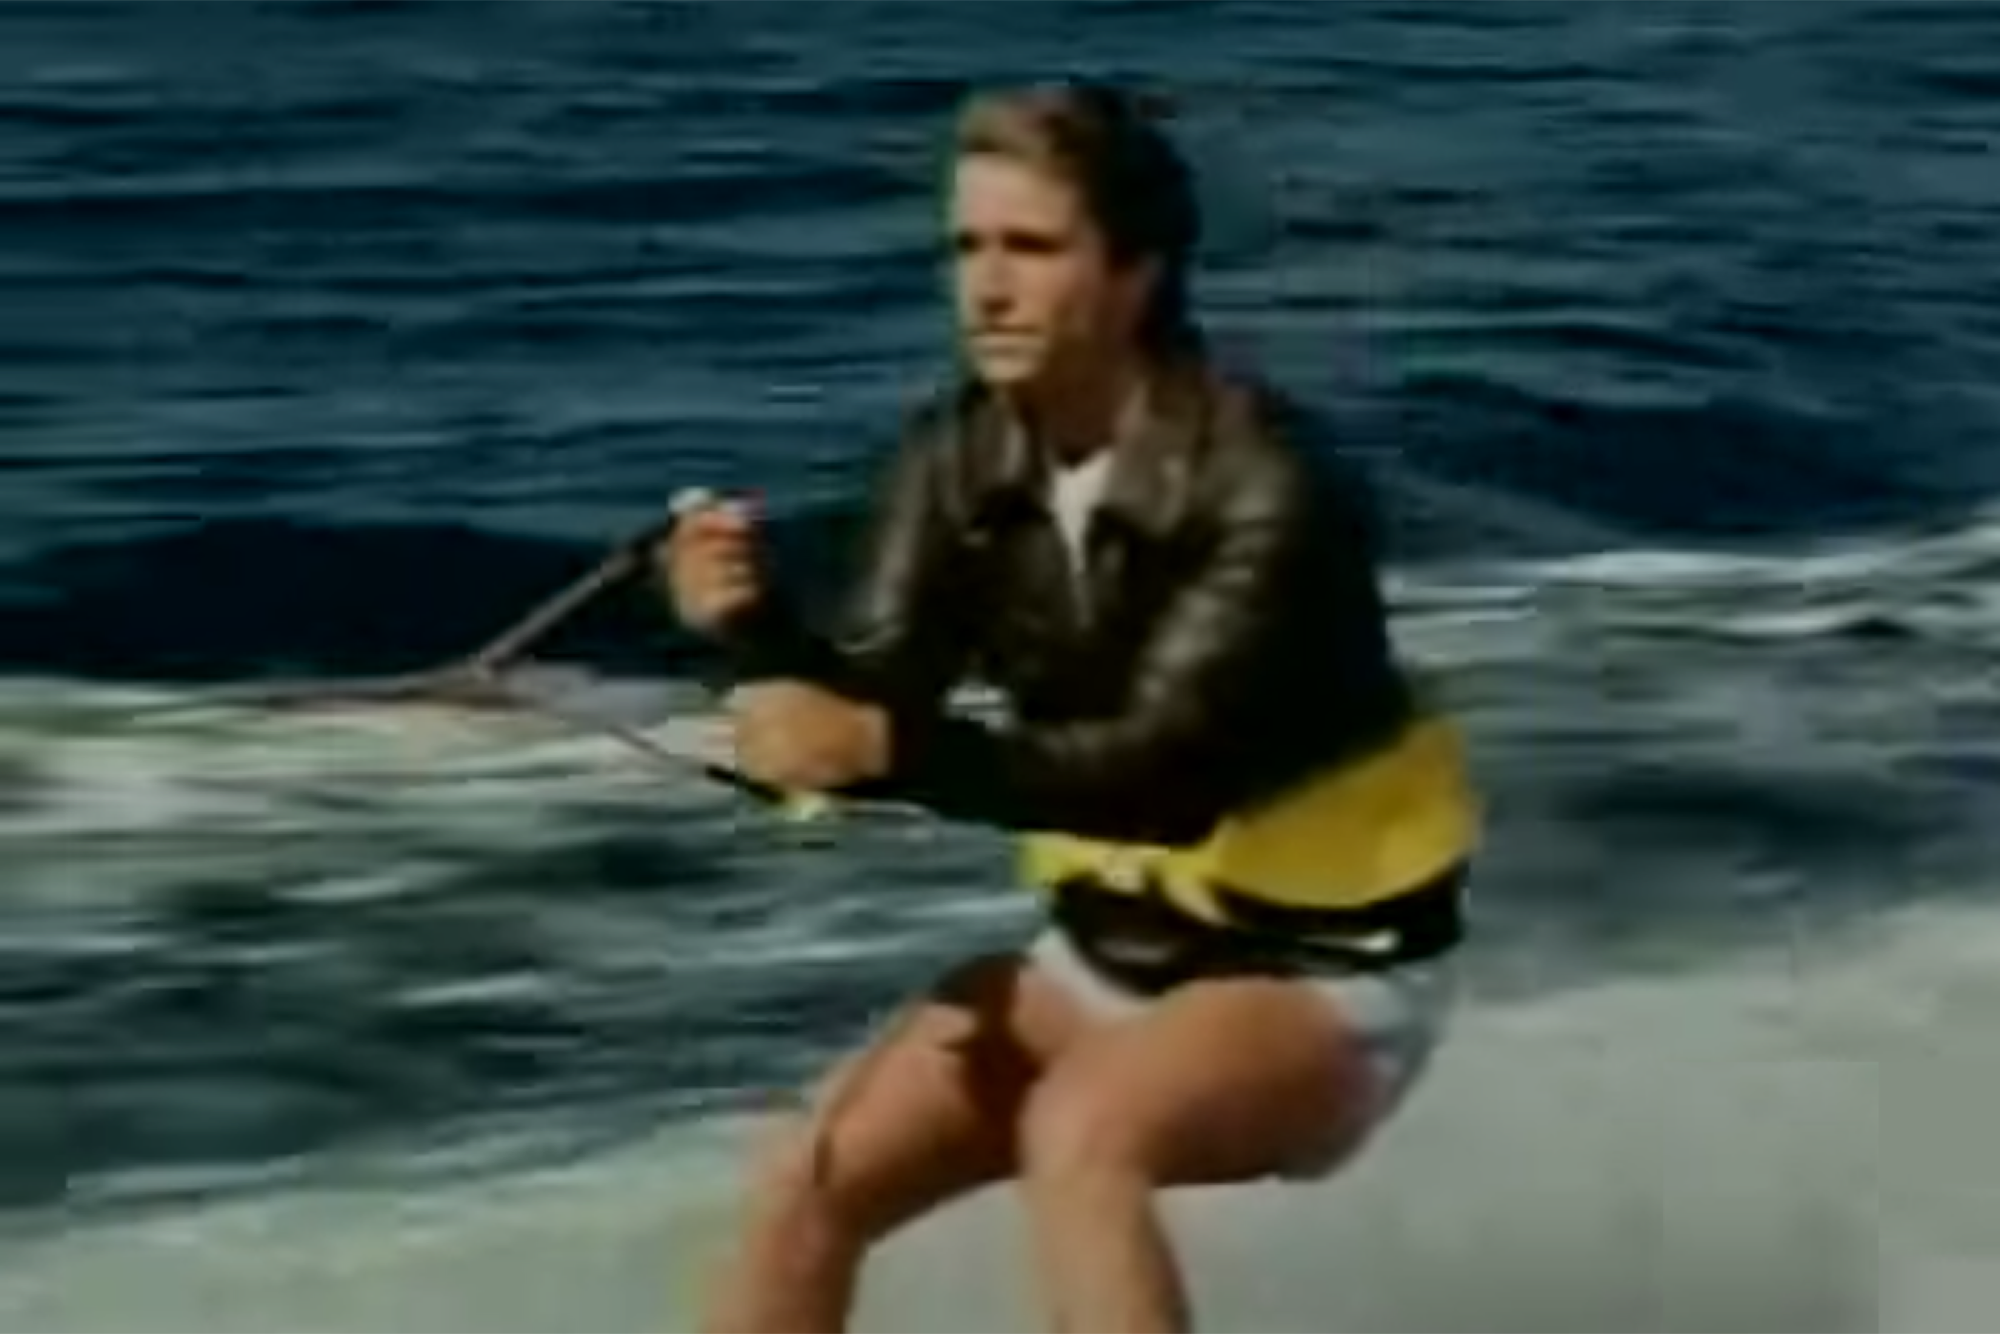 Fonzie jumps over shark with water skis